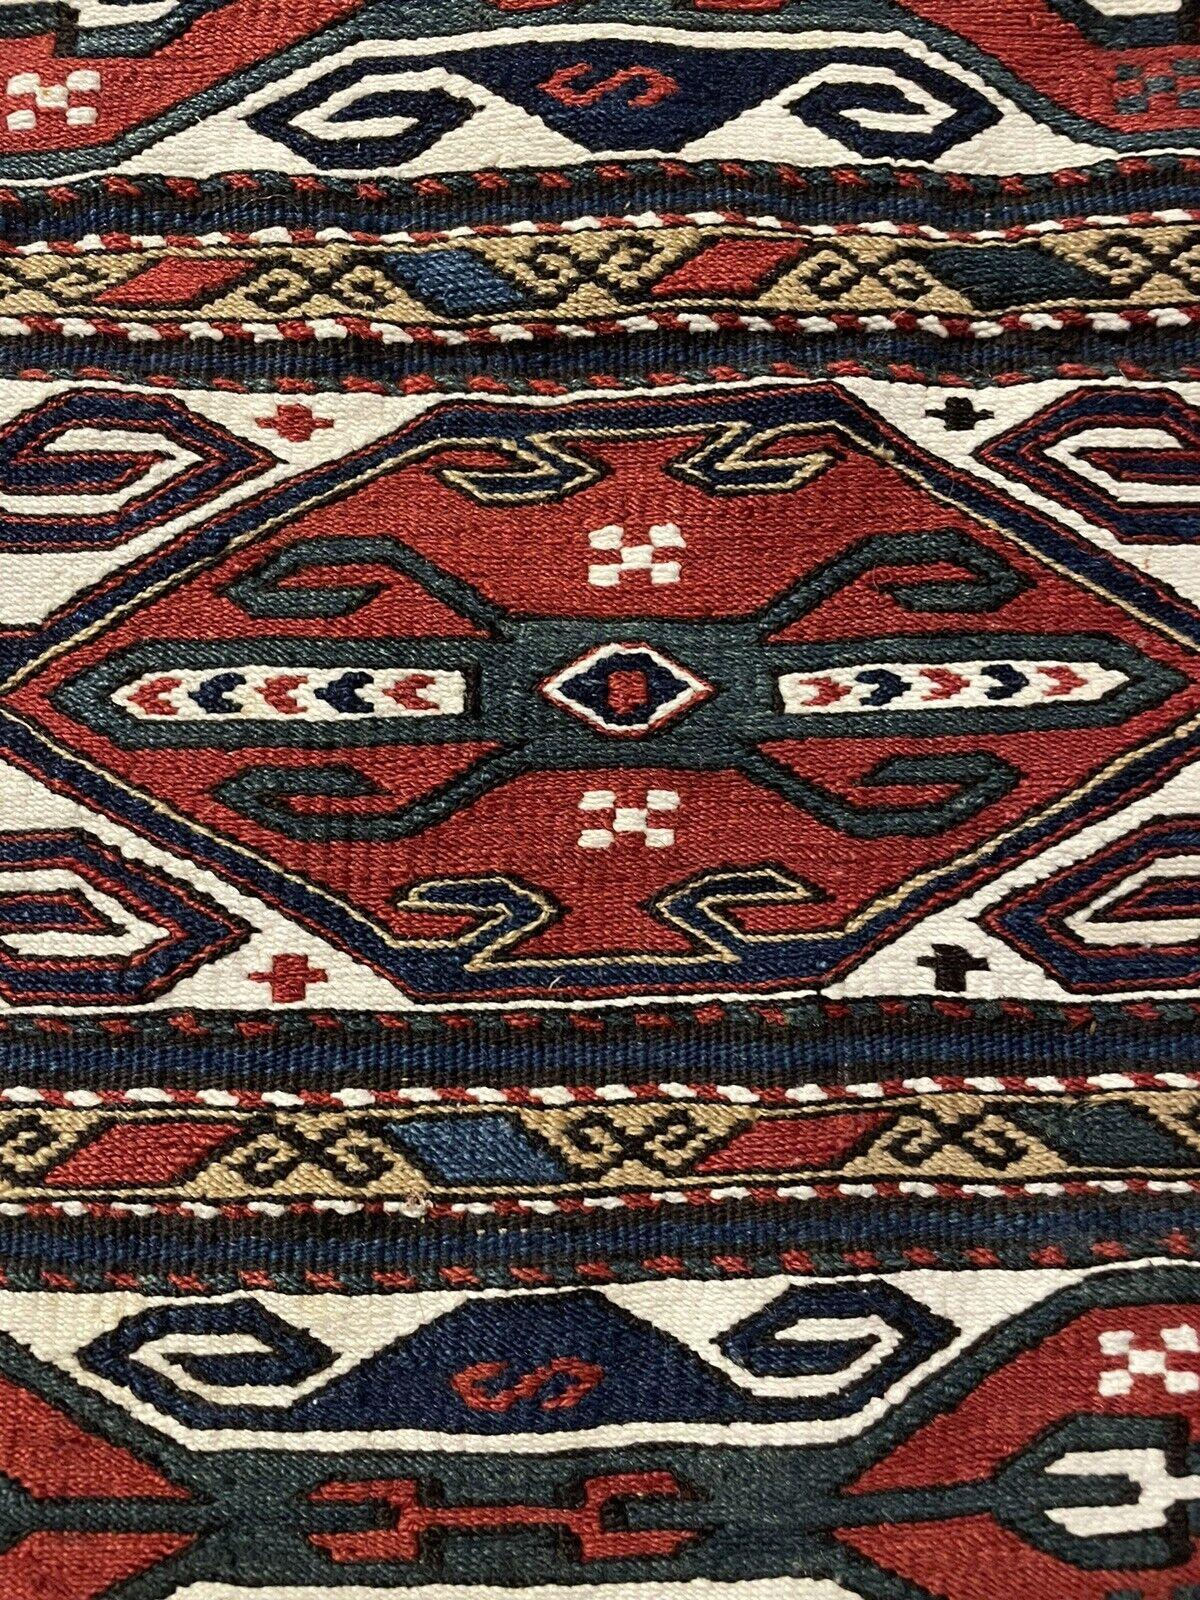 Handmade Antique Persian Style Sumak Collectible Kilim 1.3' x 1.8, 1900s - 1N04 For Sale 7